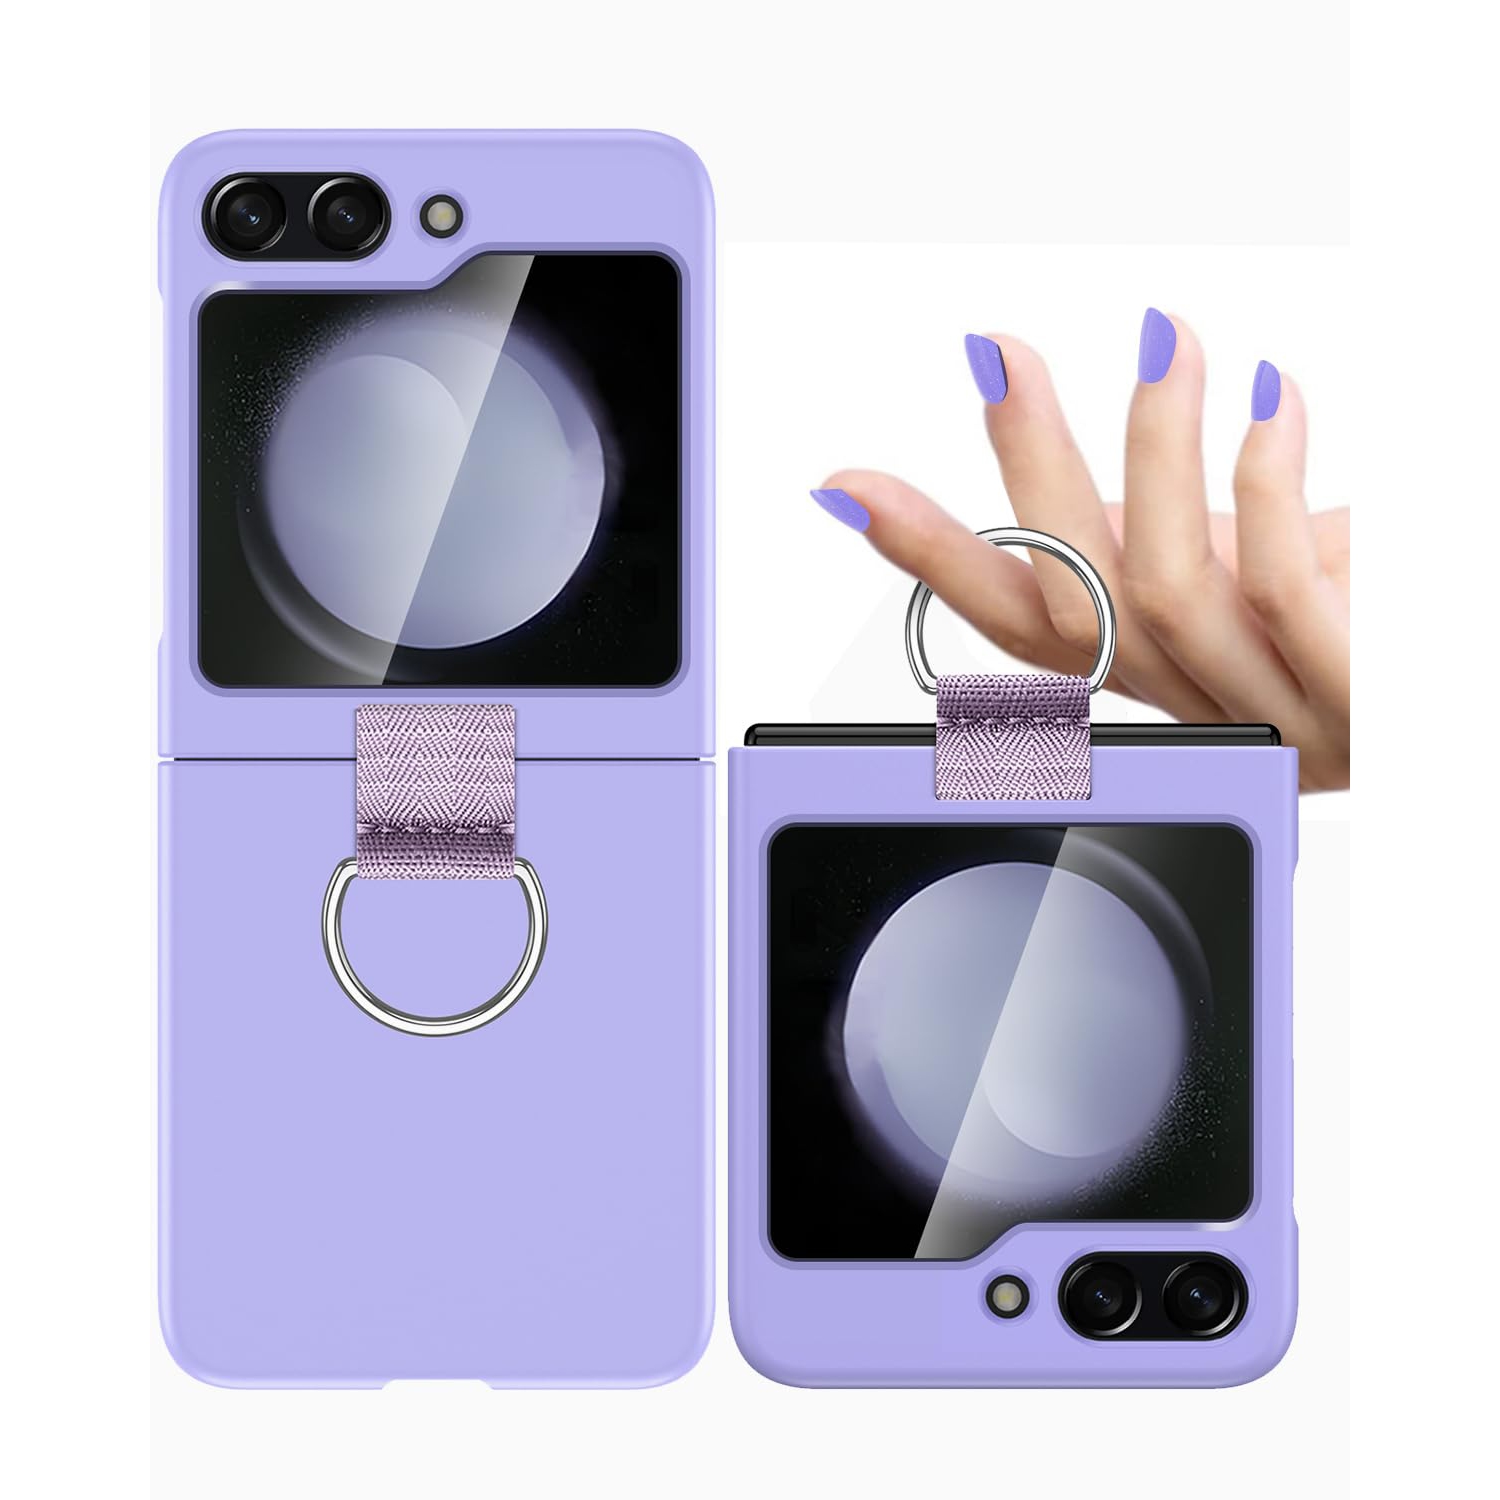 Samsung Galaxy Z Flip 5 Case with Ring, Protective Slim Thin Fit Women Girl Cute Phone Case for Samsung Galaxy Z Flip 5 5g, Purple